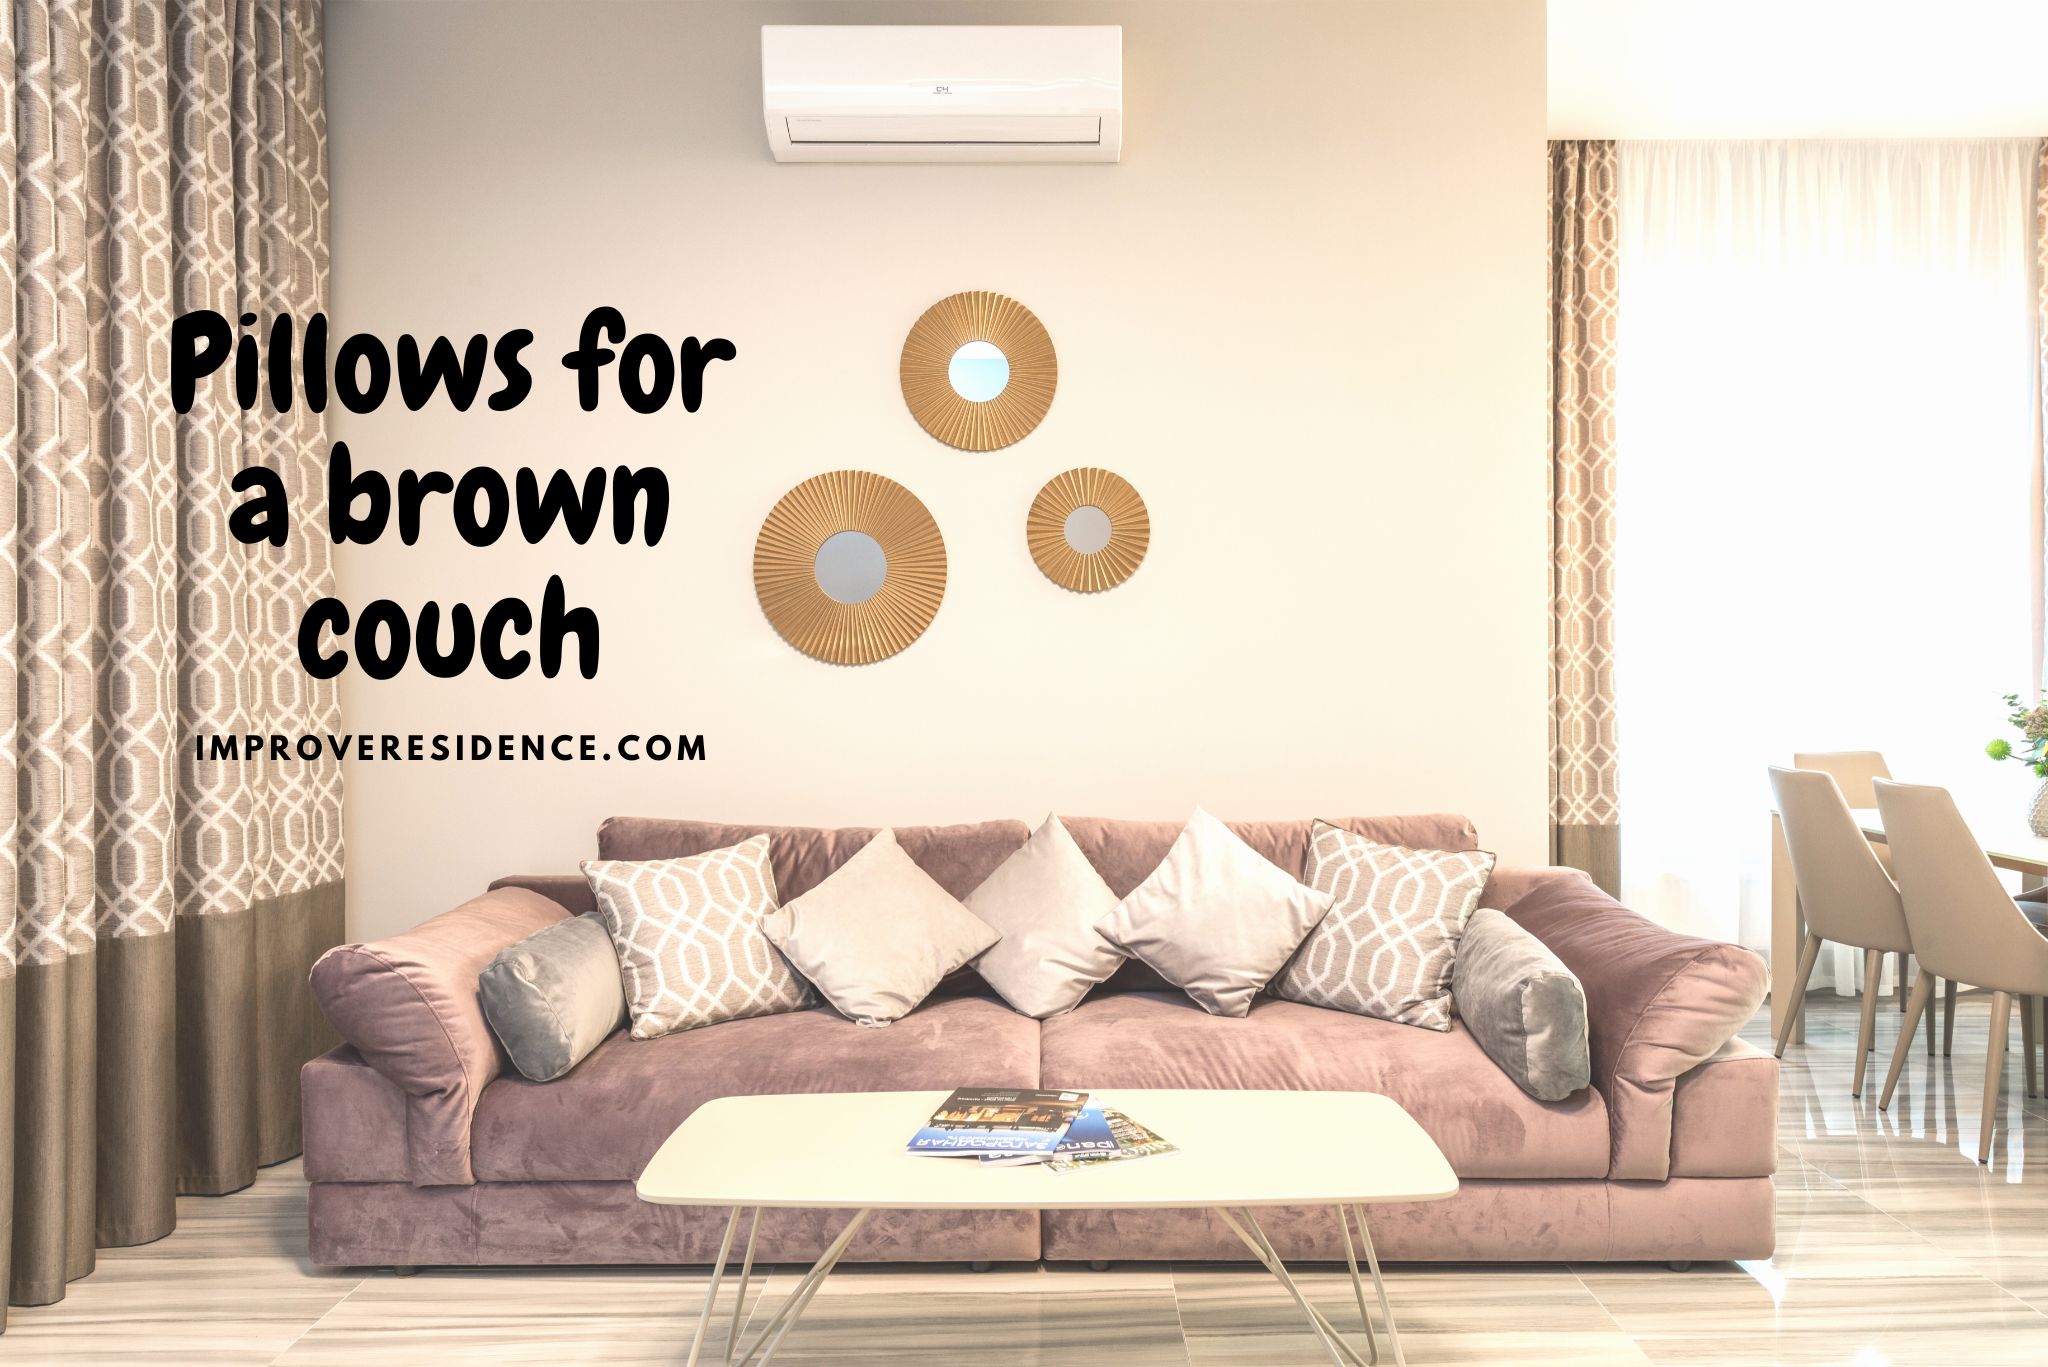 WHAT COLOR PILLOWS FOR A BROWN COUCH?